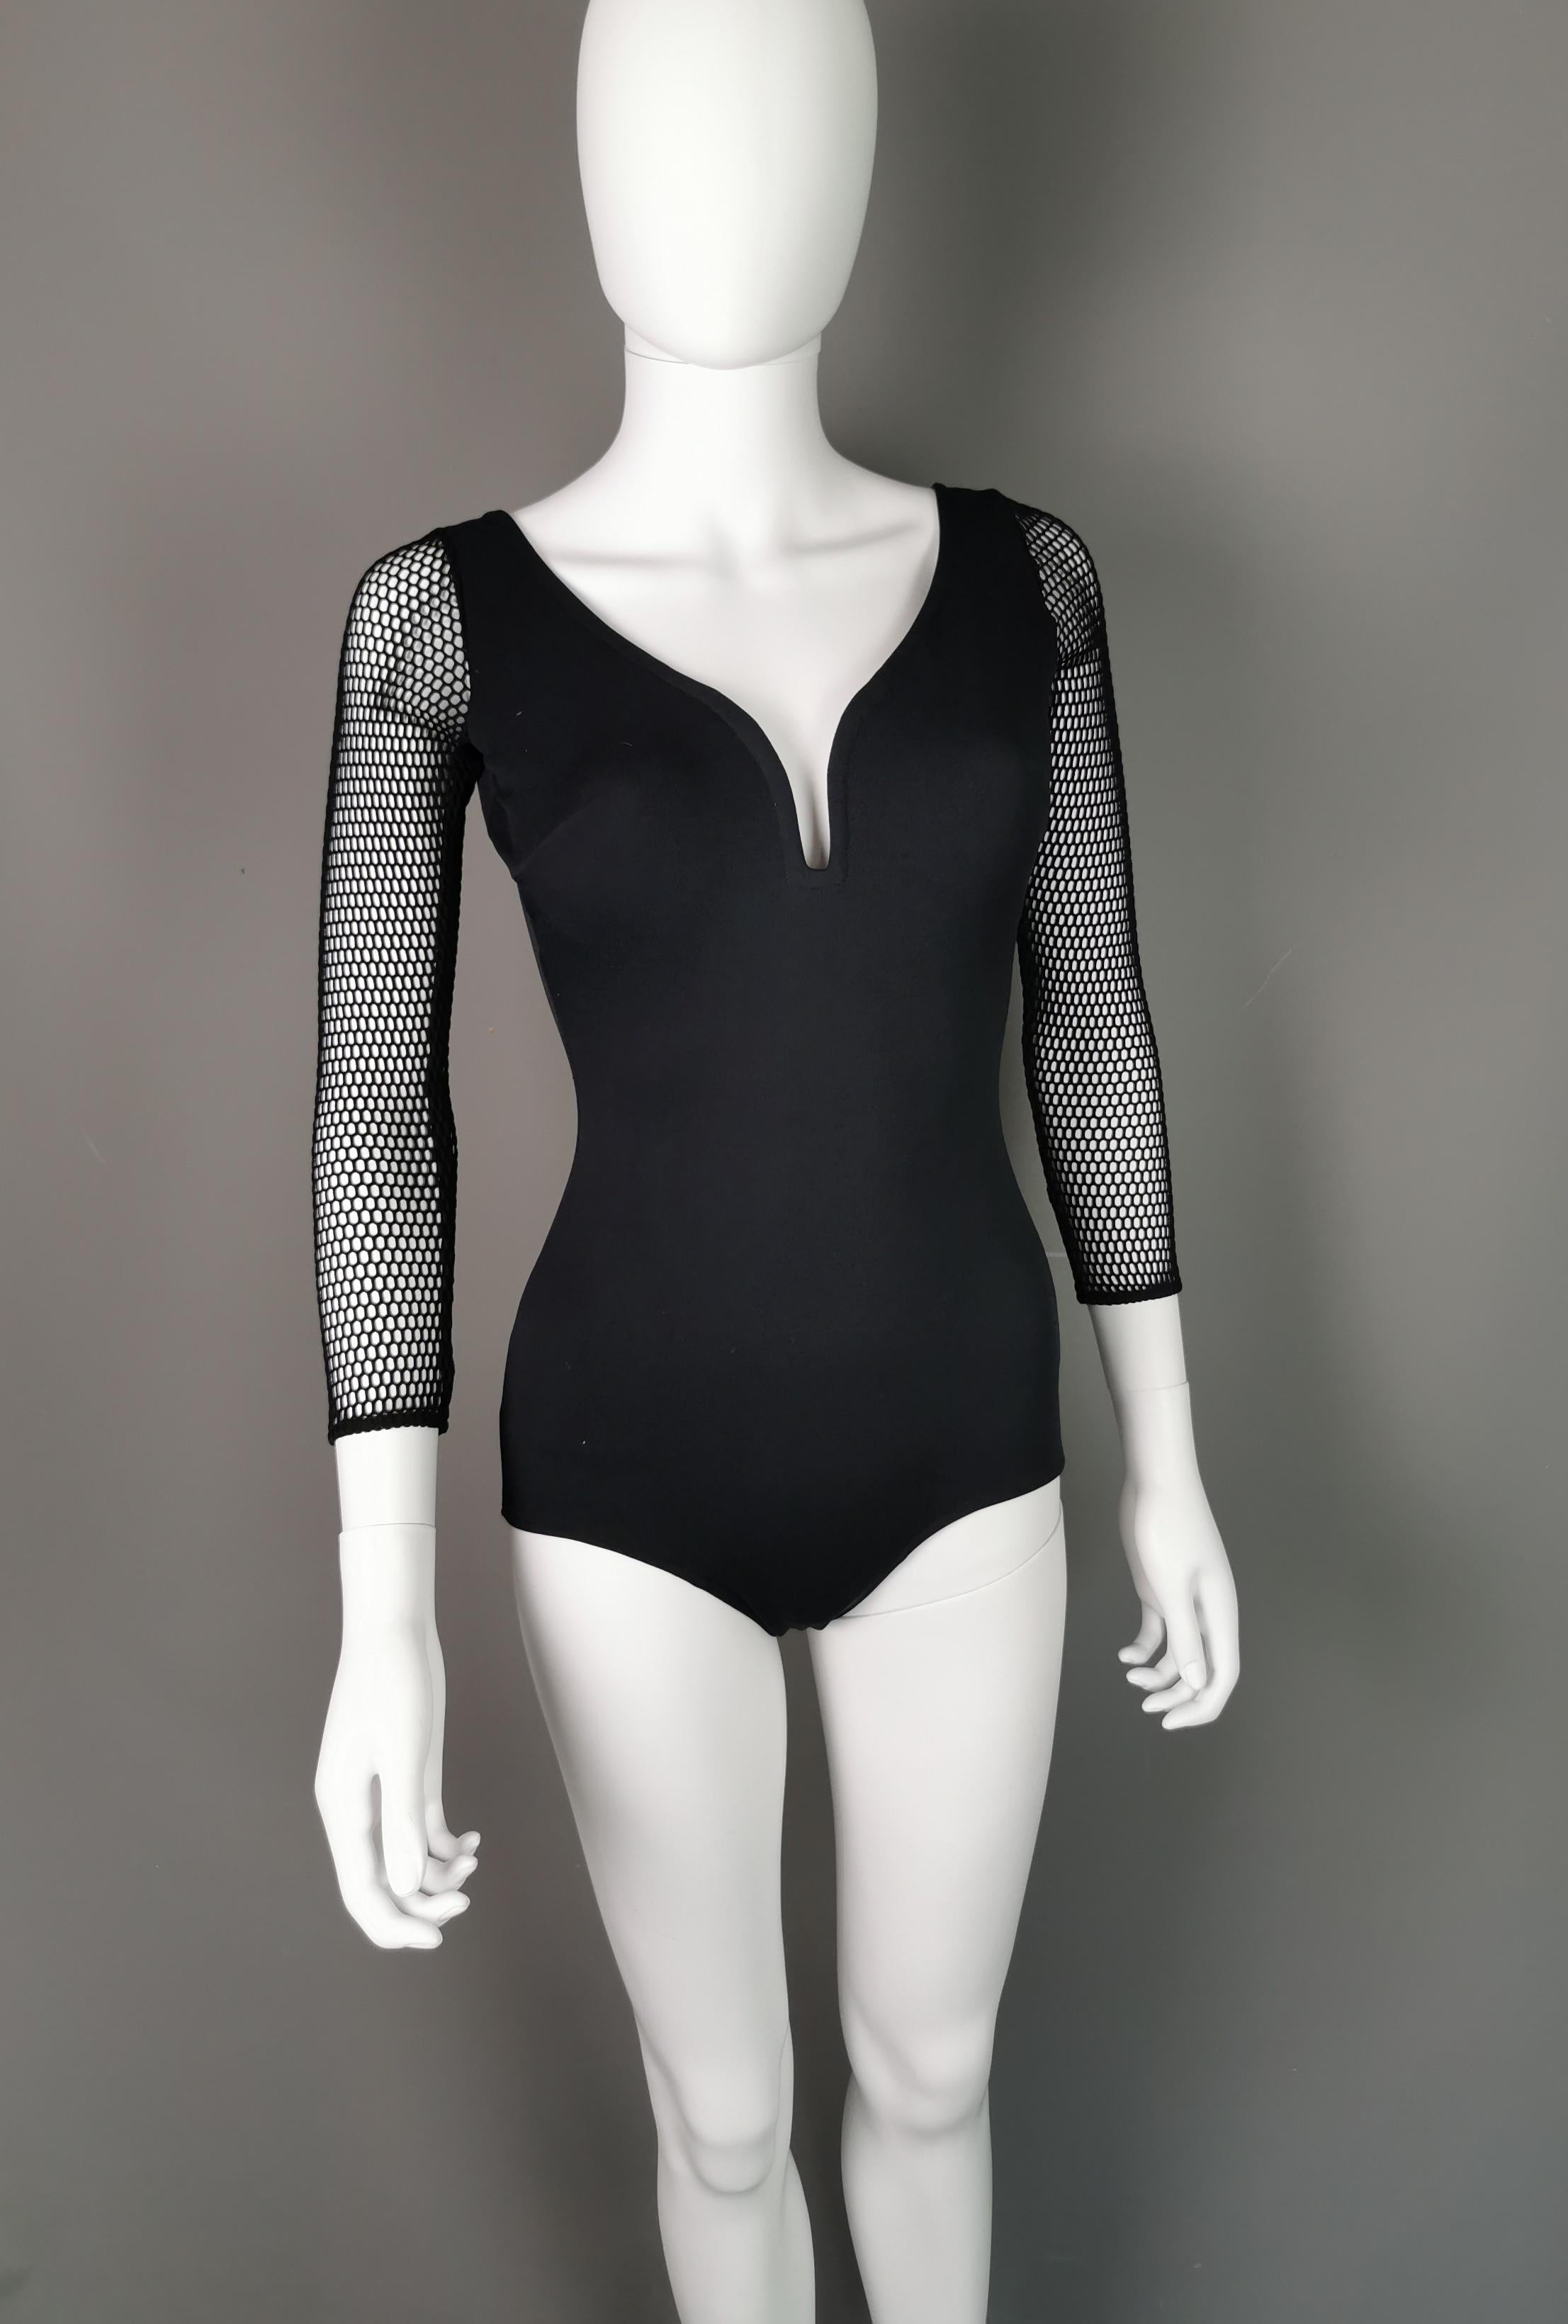 A gorgeous vampy 1980s original swimsuit.

It is in a rich sleek black stretchy fabric with a v neck, low cut back and with padded cups.

Perhaps the best thing about this sassy swimsuit is the amazing stretch fishnet sleeves.

This is an amazing